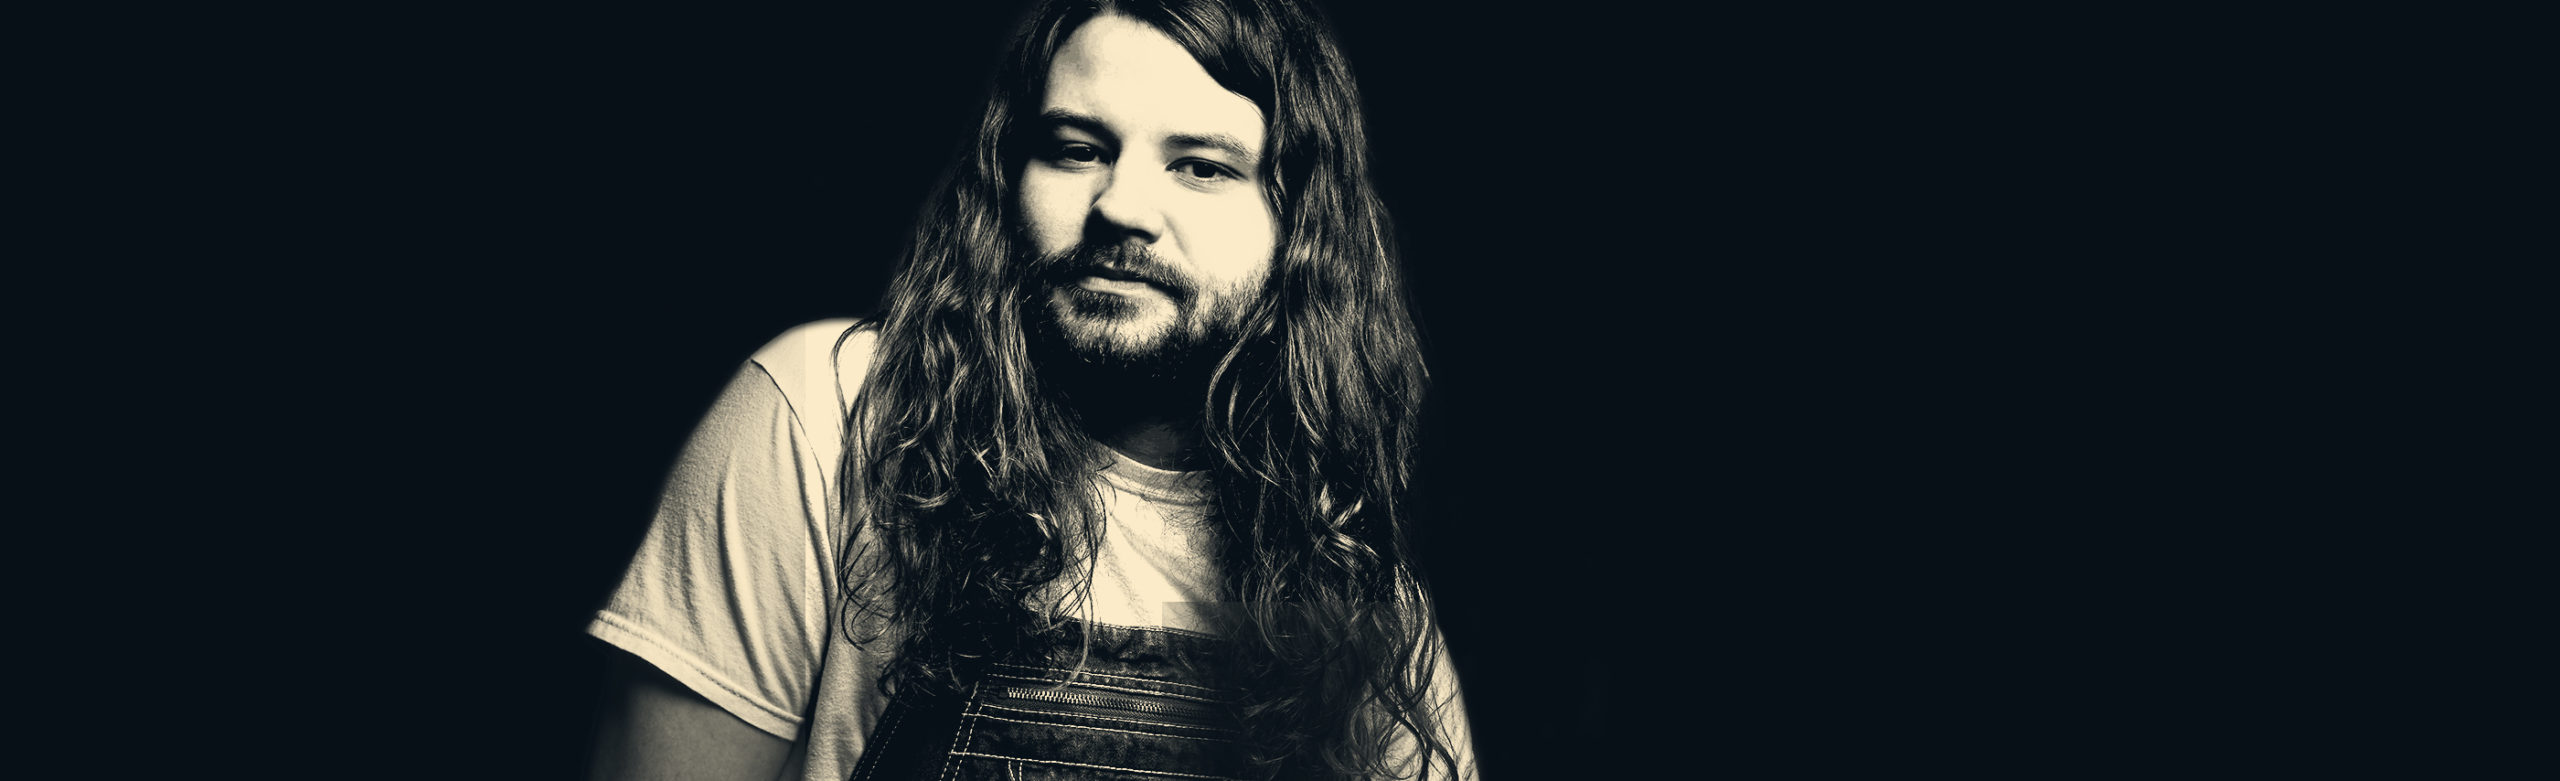 Brent Cobb and Them Tickets + Tour T-Shirt Giveaway Image